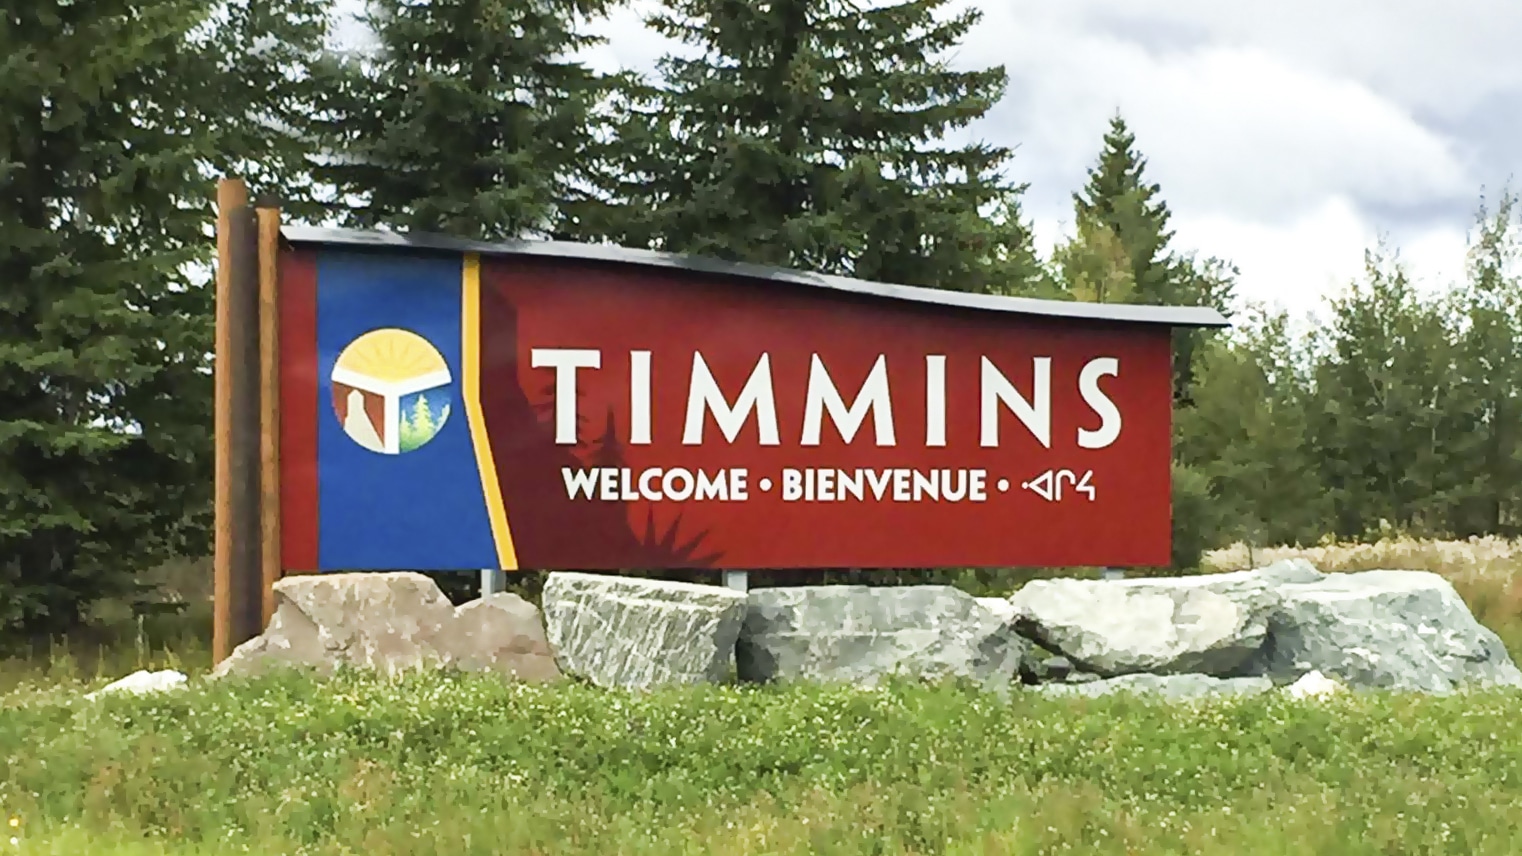 Welcome to Timmins Ontario - Timmins Tourism I'm In Branding